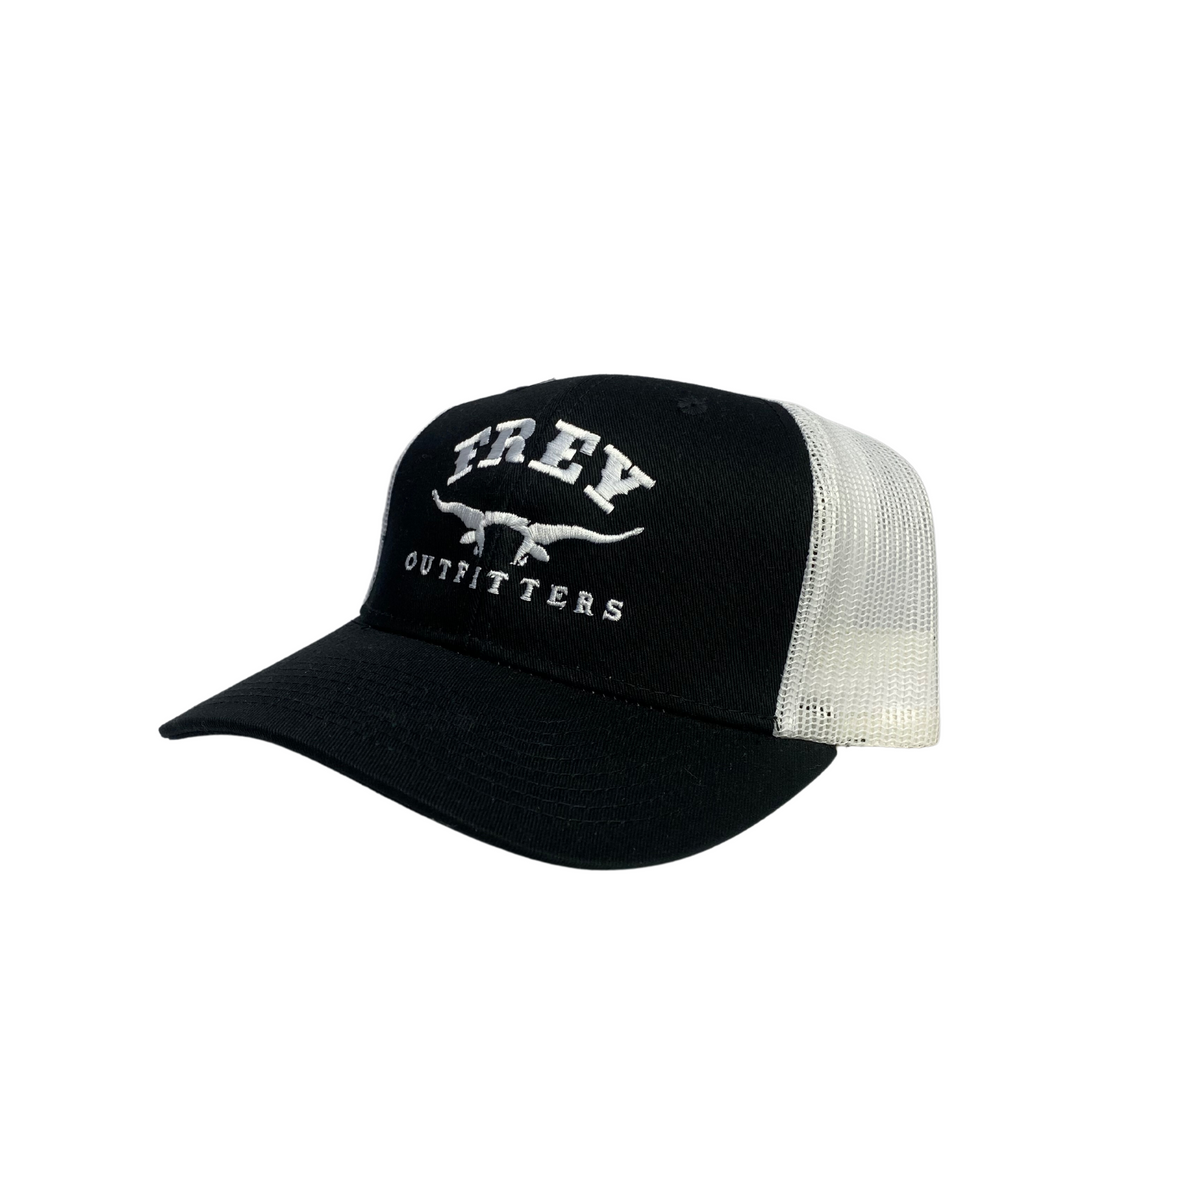 Frey Outfitters Black/White Cap